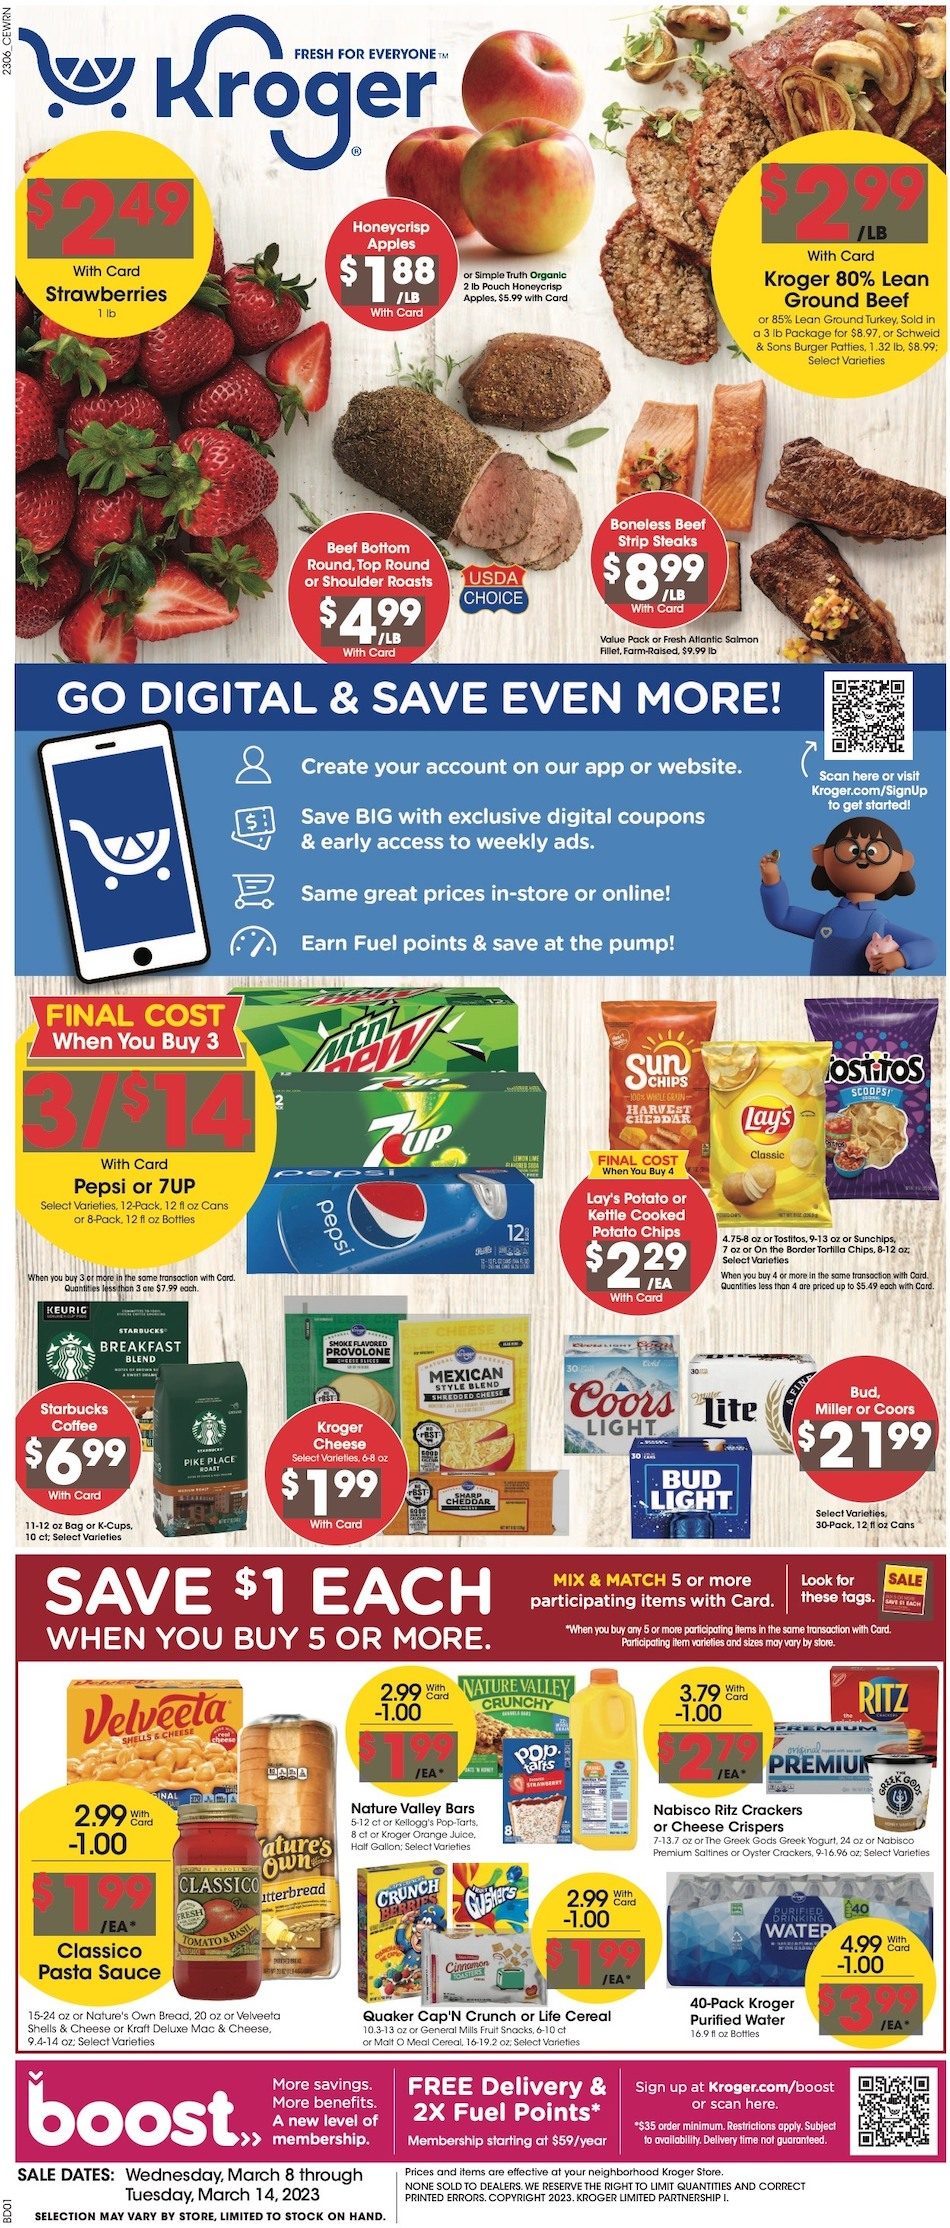 Kroger Weekly Ad Sale 8th – 14th March 2023 Page 1